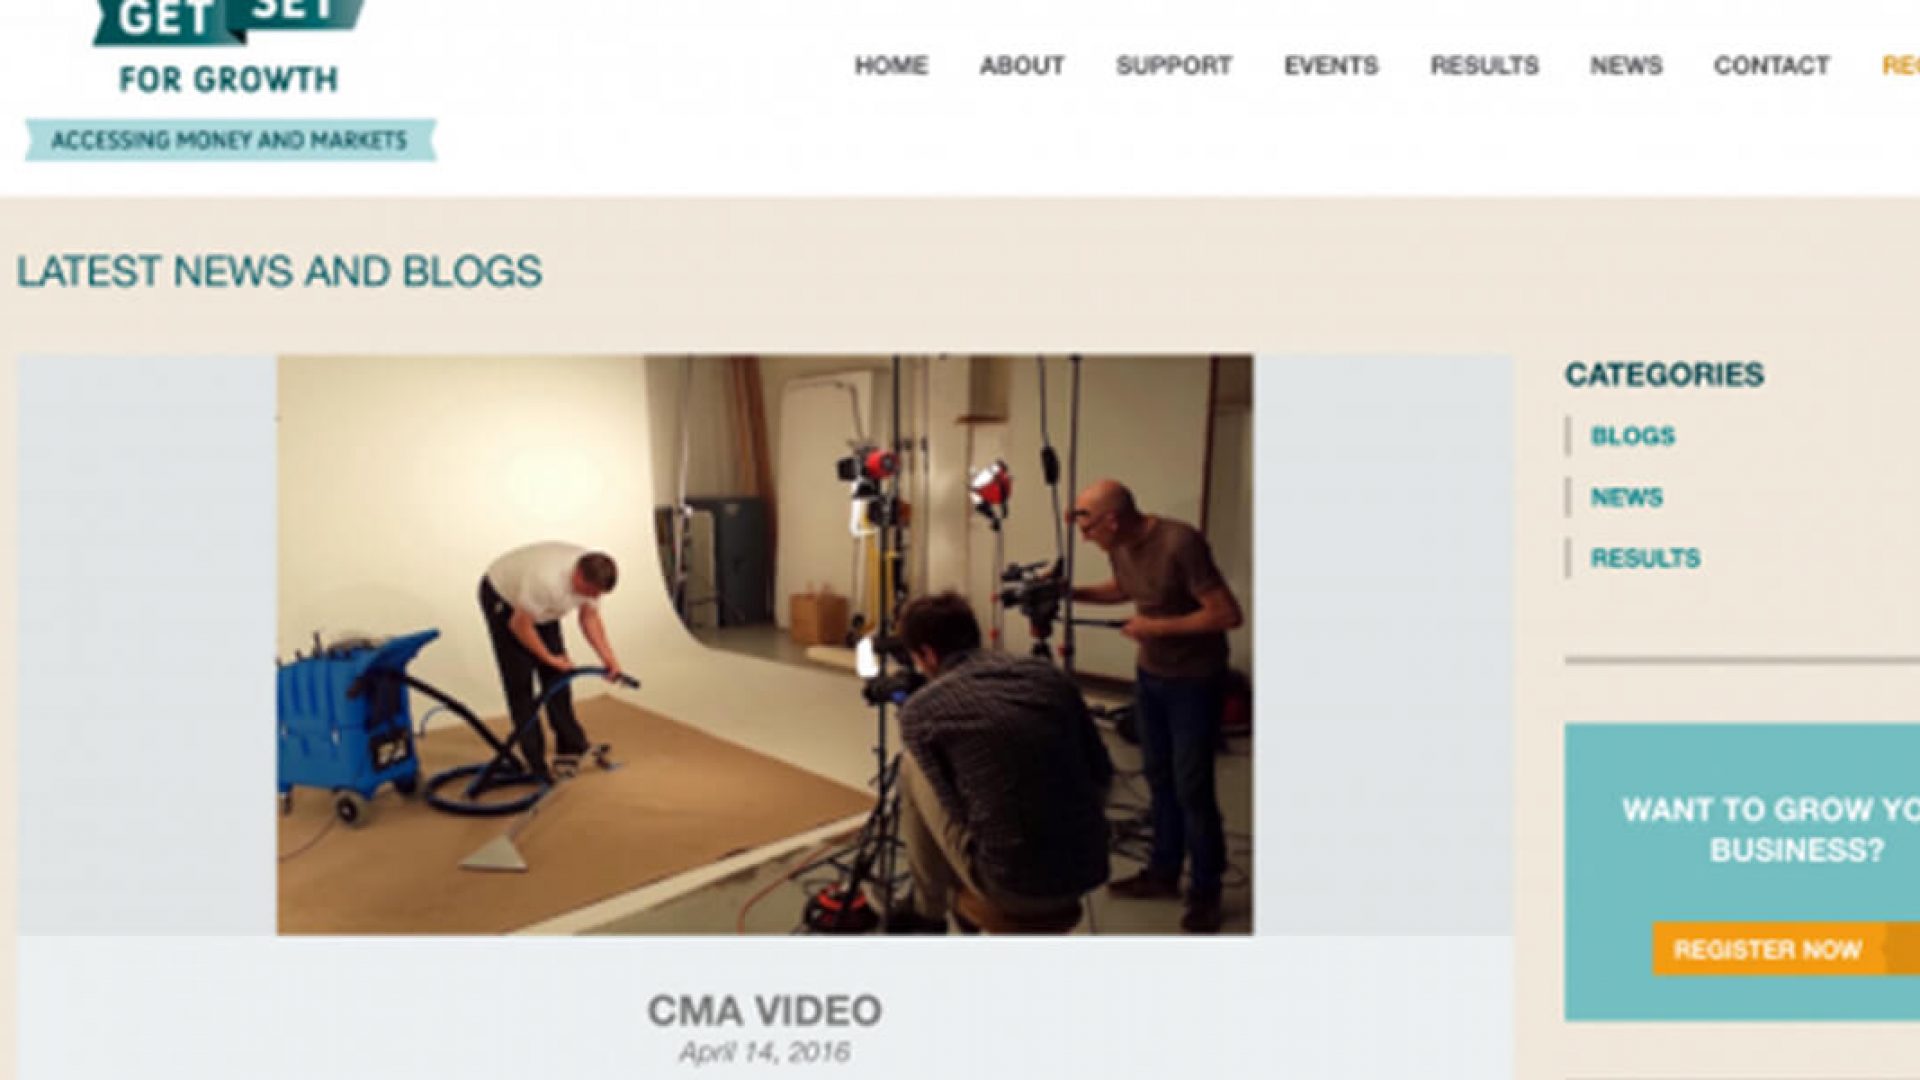 CMA Video Is A Get Set For Growth Case Study